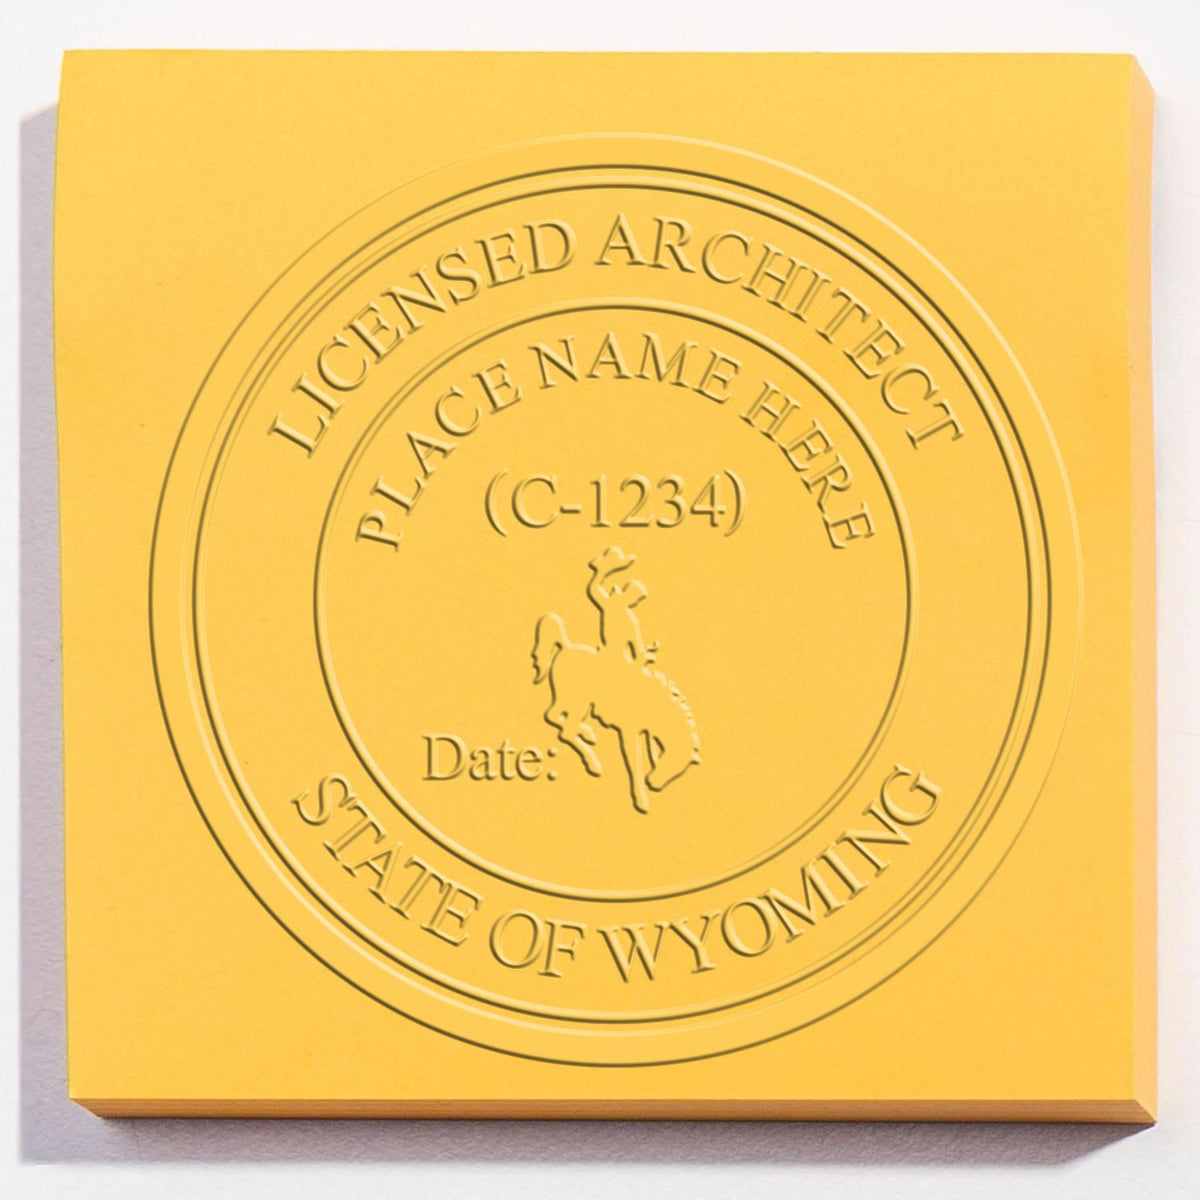 The State of Wyoming Long Reach Architectural Embossing Seal stamp impression comes to life with a crisp, detailed photo on paper - showcasing true professional quality.